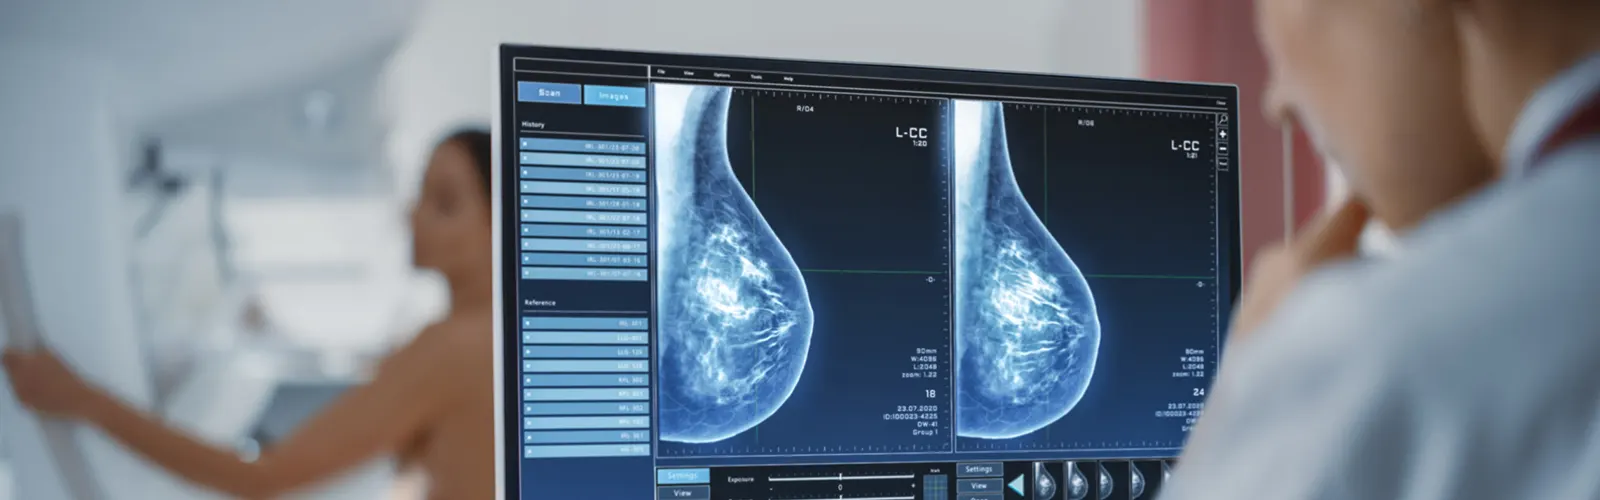 What Are The Different Types Of Mammography?